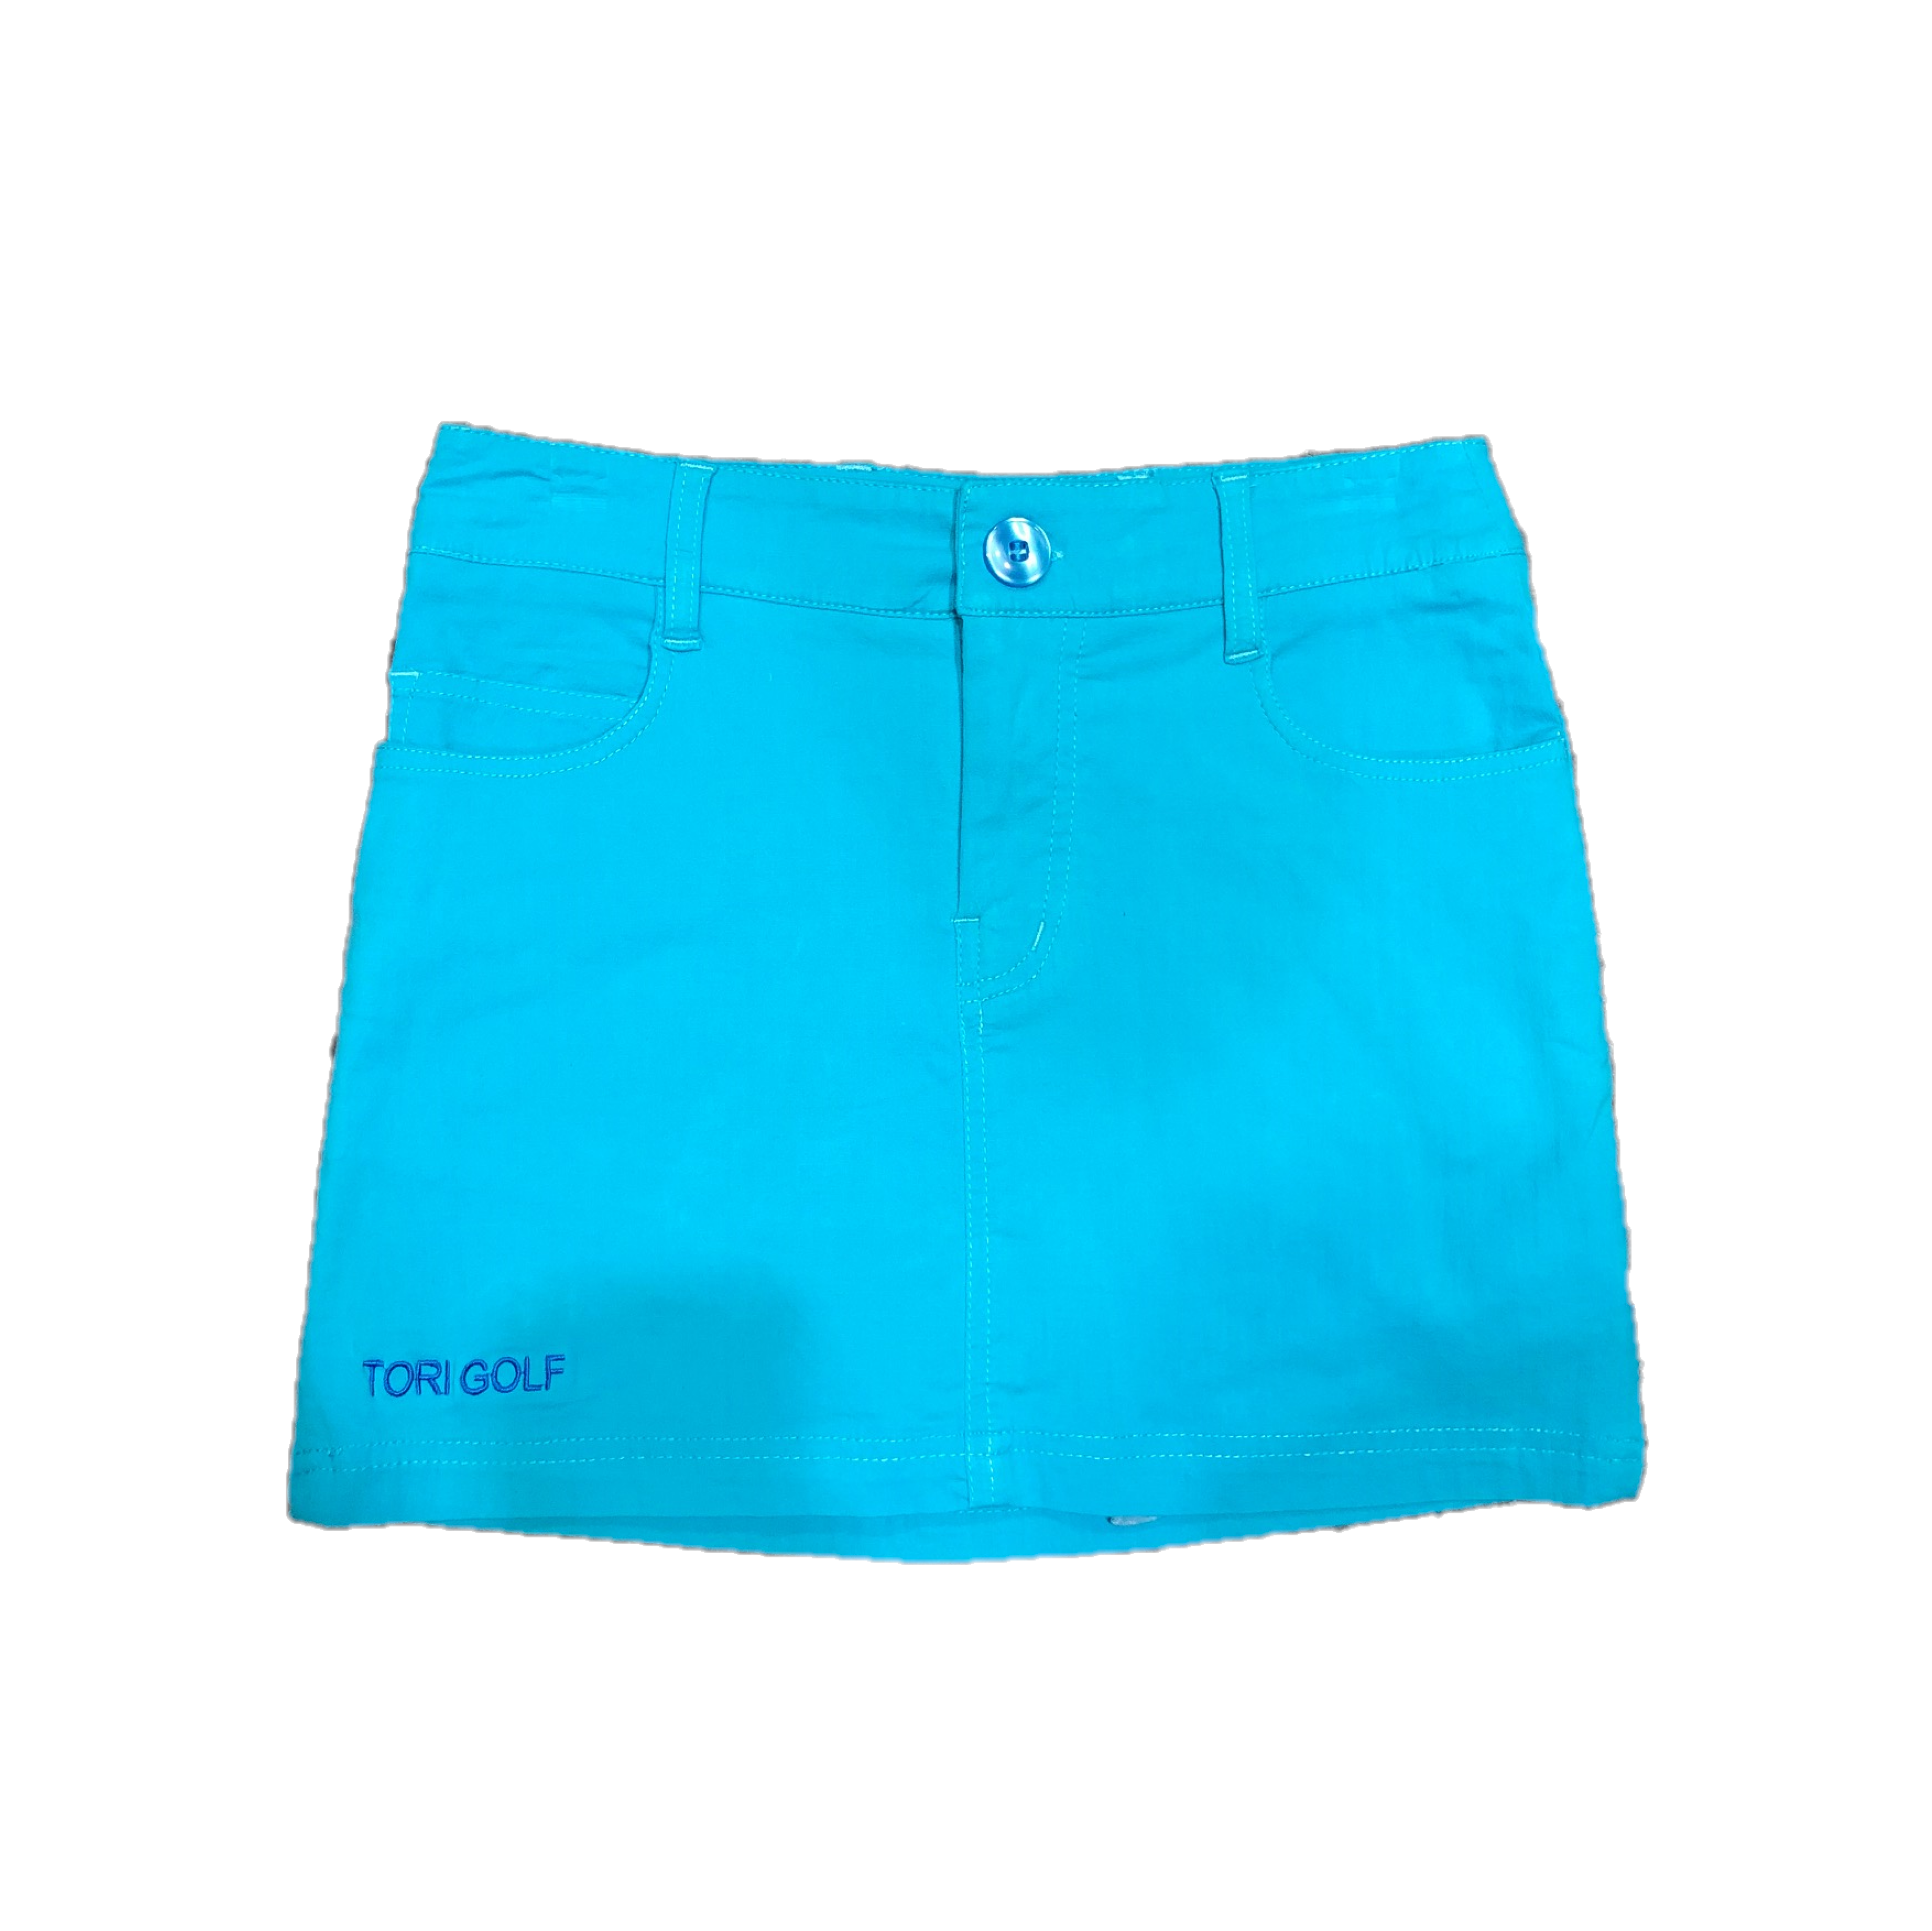 LS-021F || Skirt Turquoise With 2 Round Pocket, 2 Rear Patch Pockets Round Zipper And 2 Zipped Side Vents.